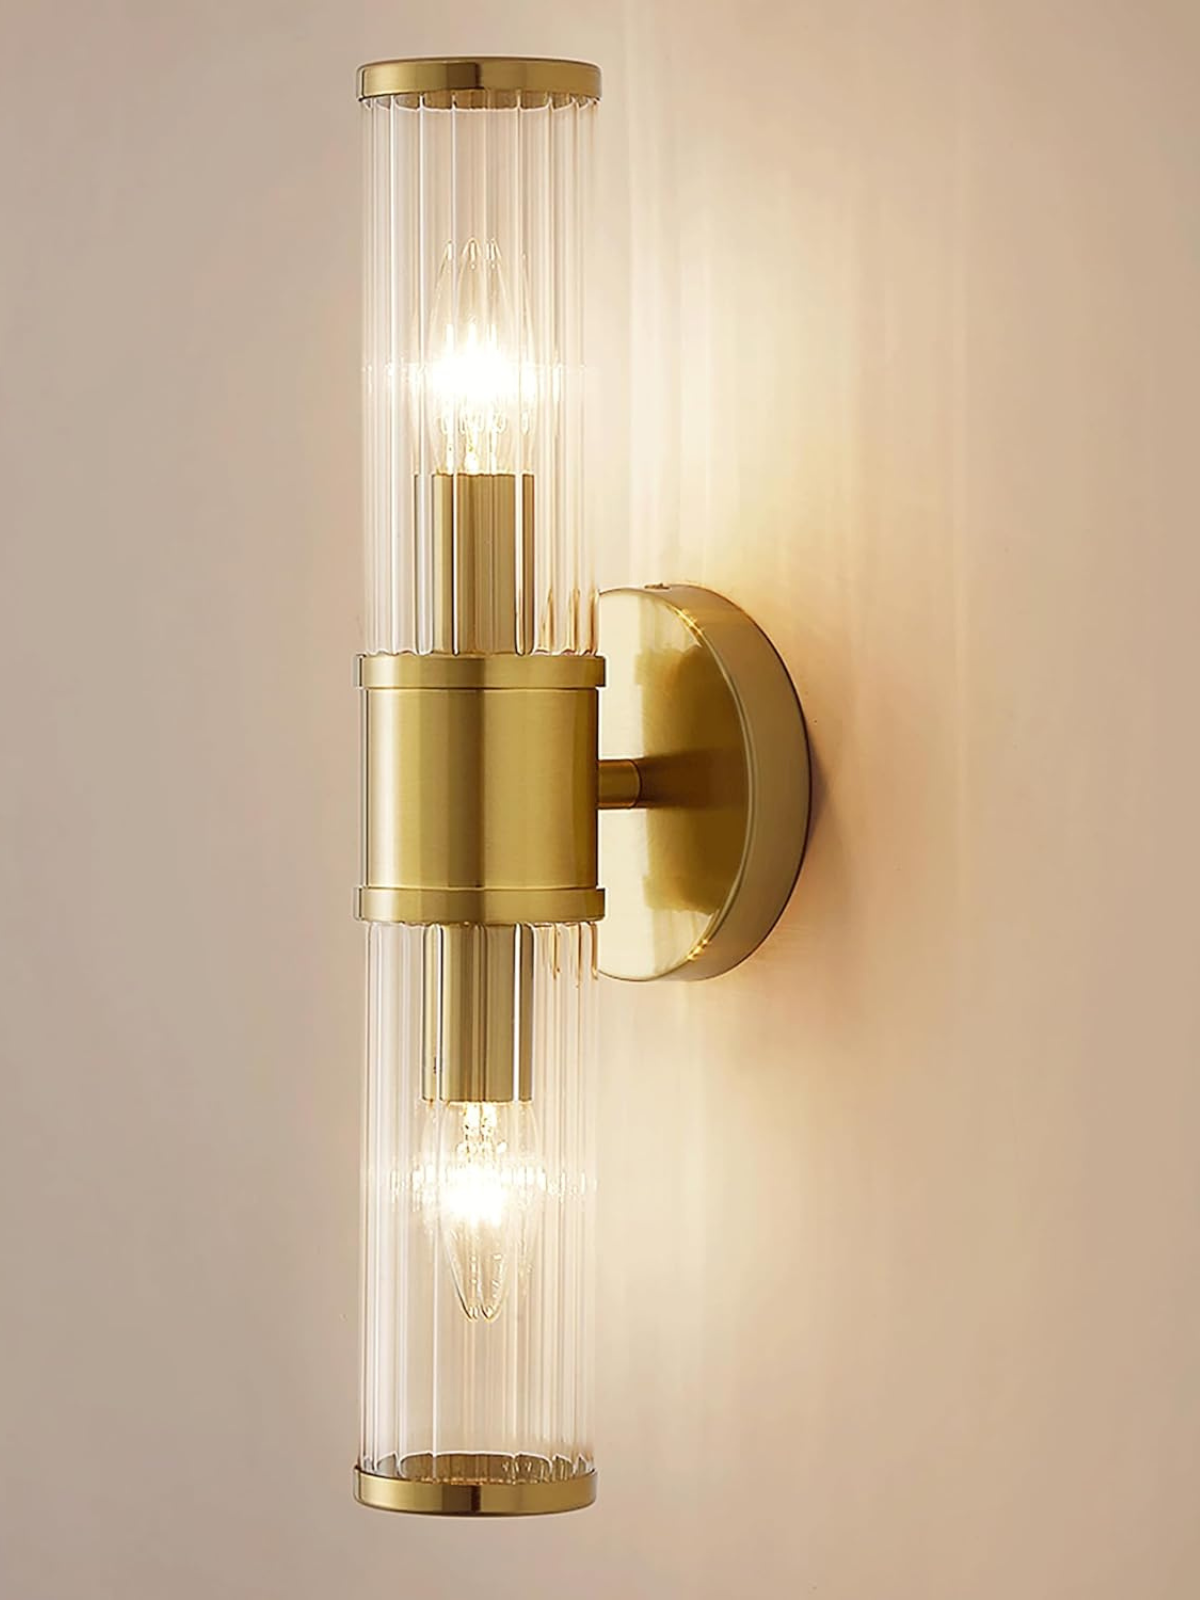 Wall Sconce for Bathroom Linour Bathroom Sconce Morden Sconce Wall Lighting Over Mirror Vanity Lights Fixture with Glass Shade (Without Bulbs)